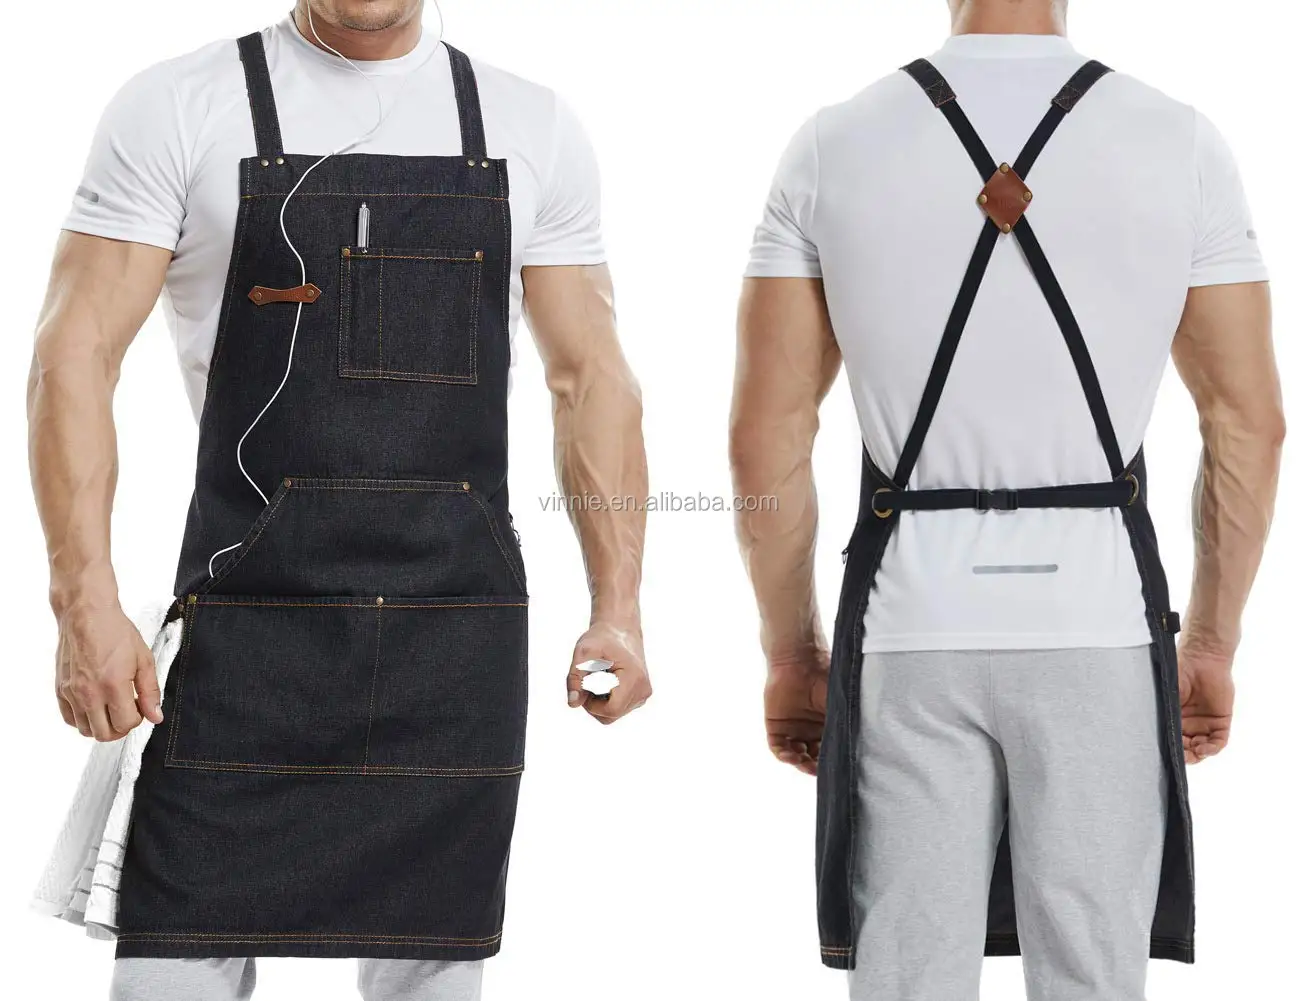 Details about   With Pockets Baking & Catering BBQ Women Ladies Chefs Apron Apron for Men 